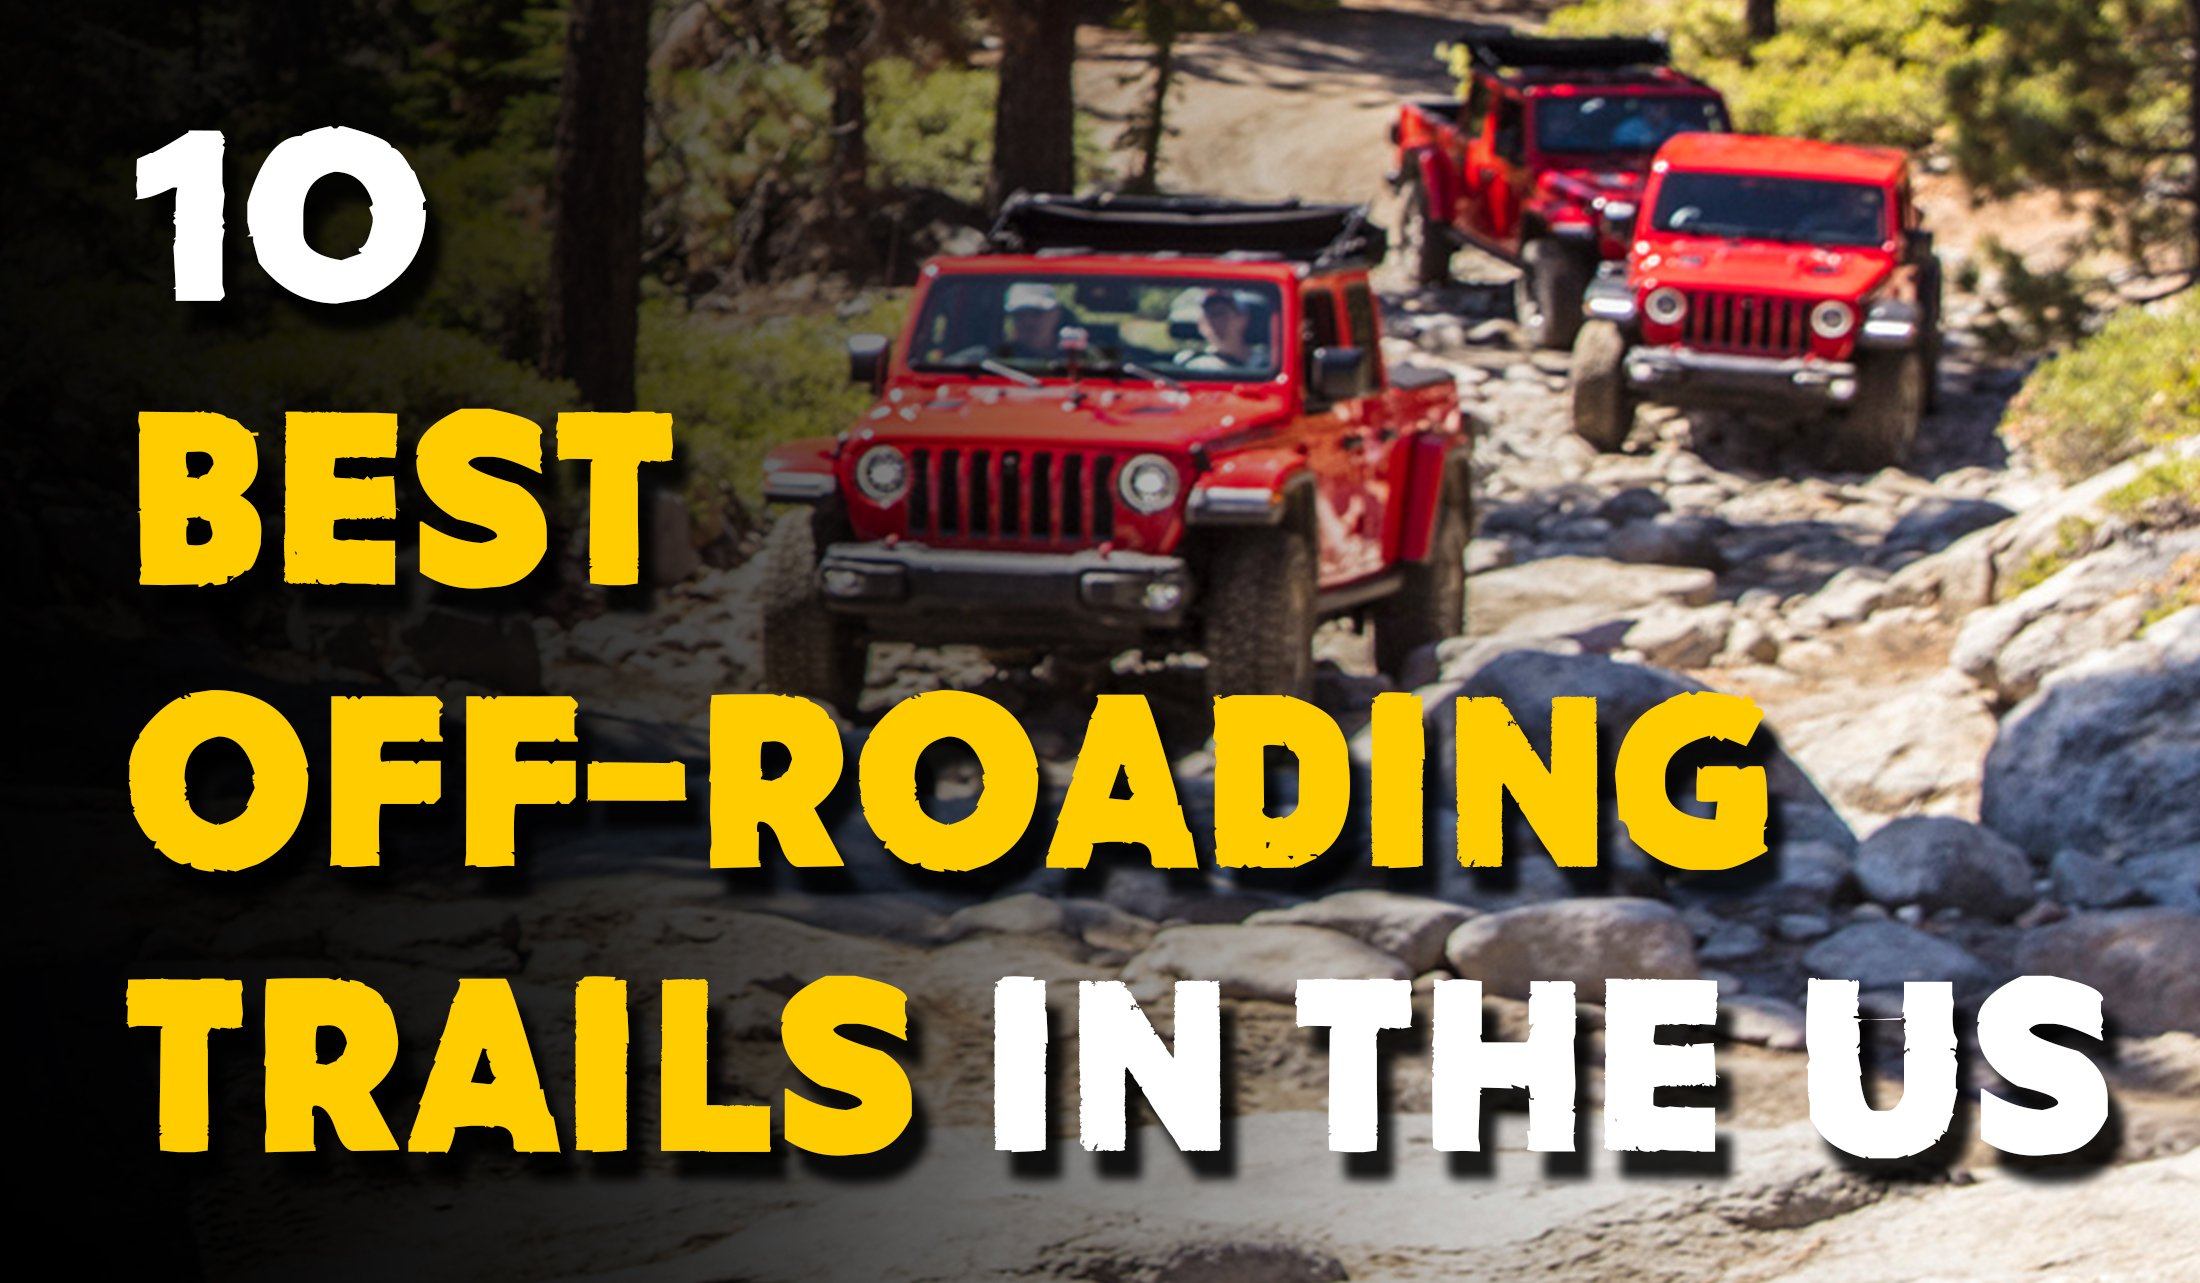 10 Best Off-Roading Trails in the US – Rhino USA